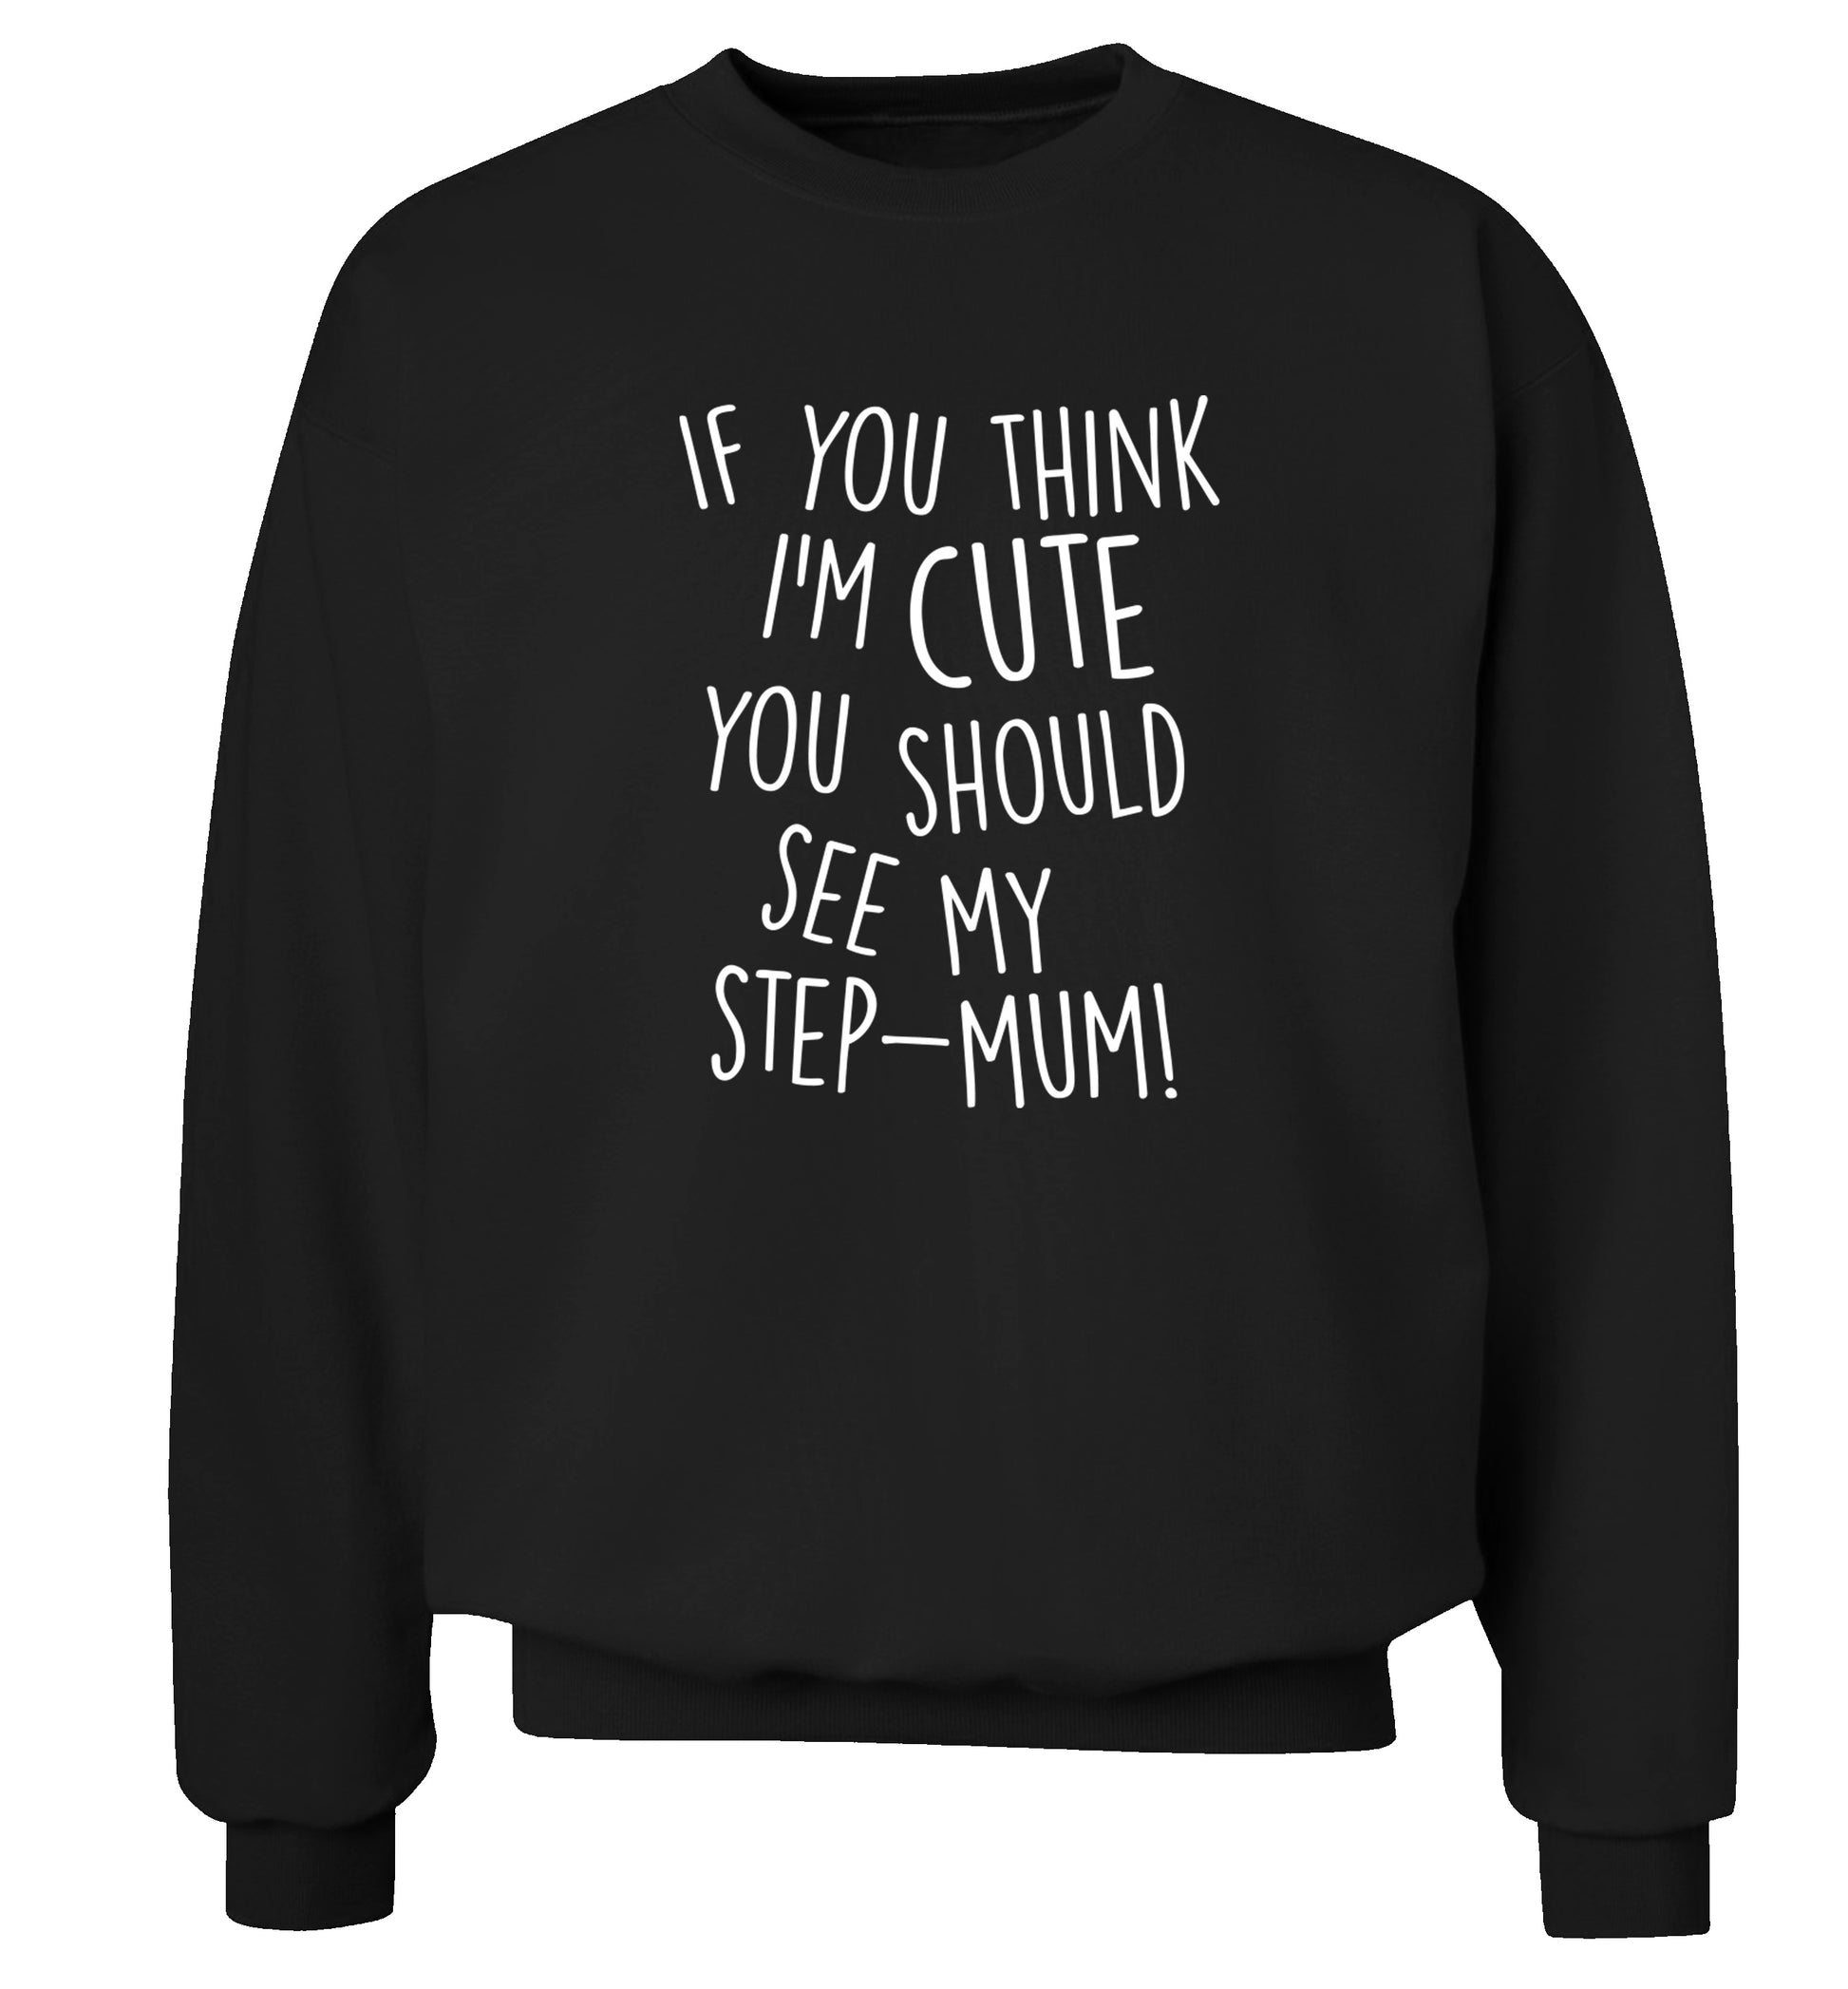 If you think I'm cute you should see my step-mum Adult's unisex black Sweater 2XL